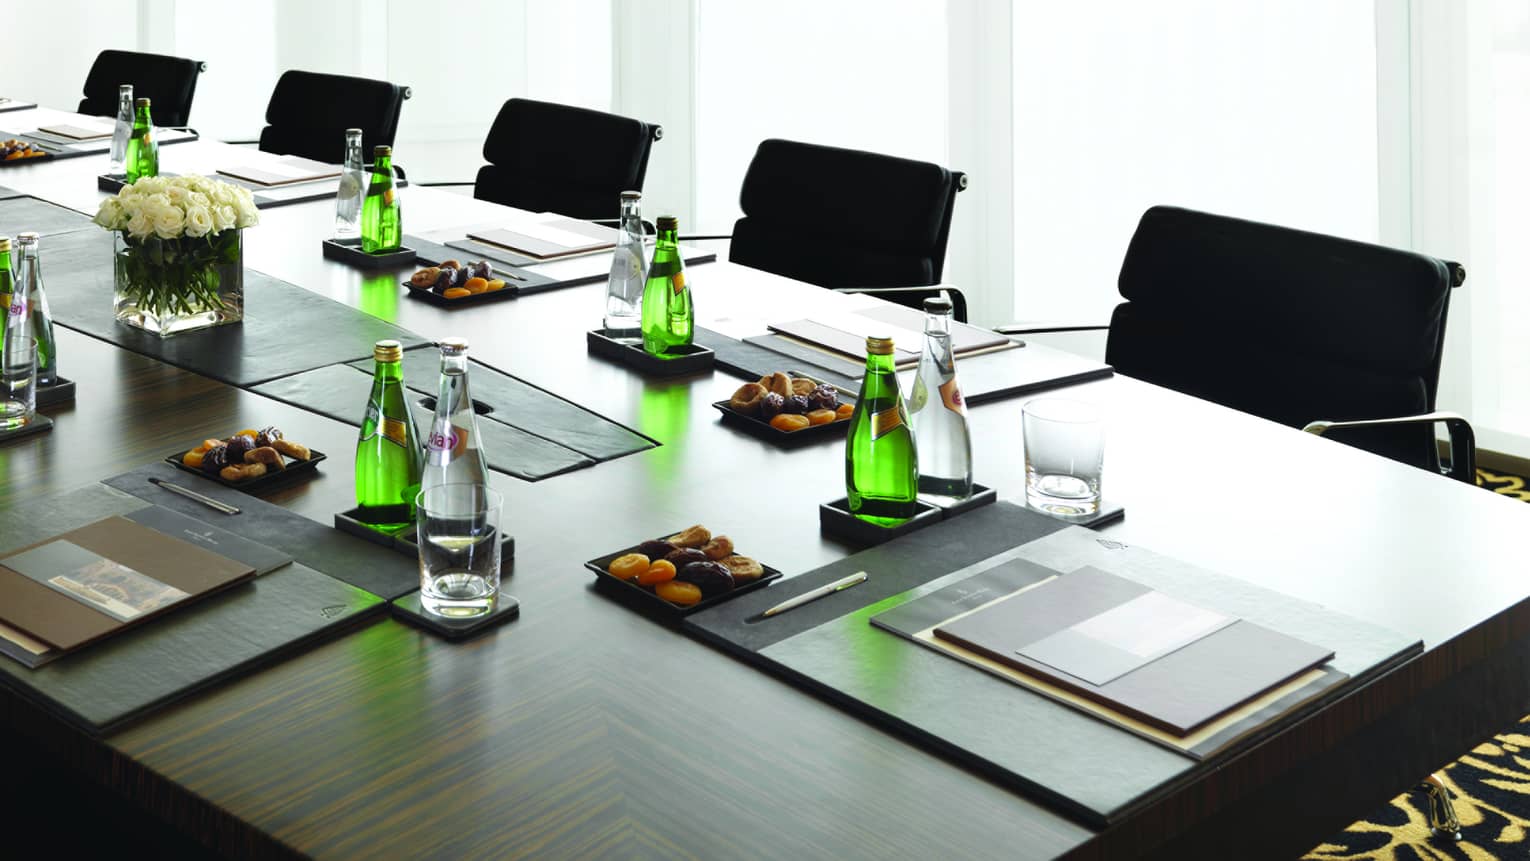 Boardroom meeting table set with water, dried apricots, menus by sunny window